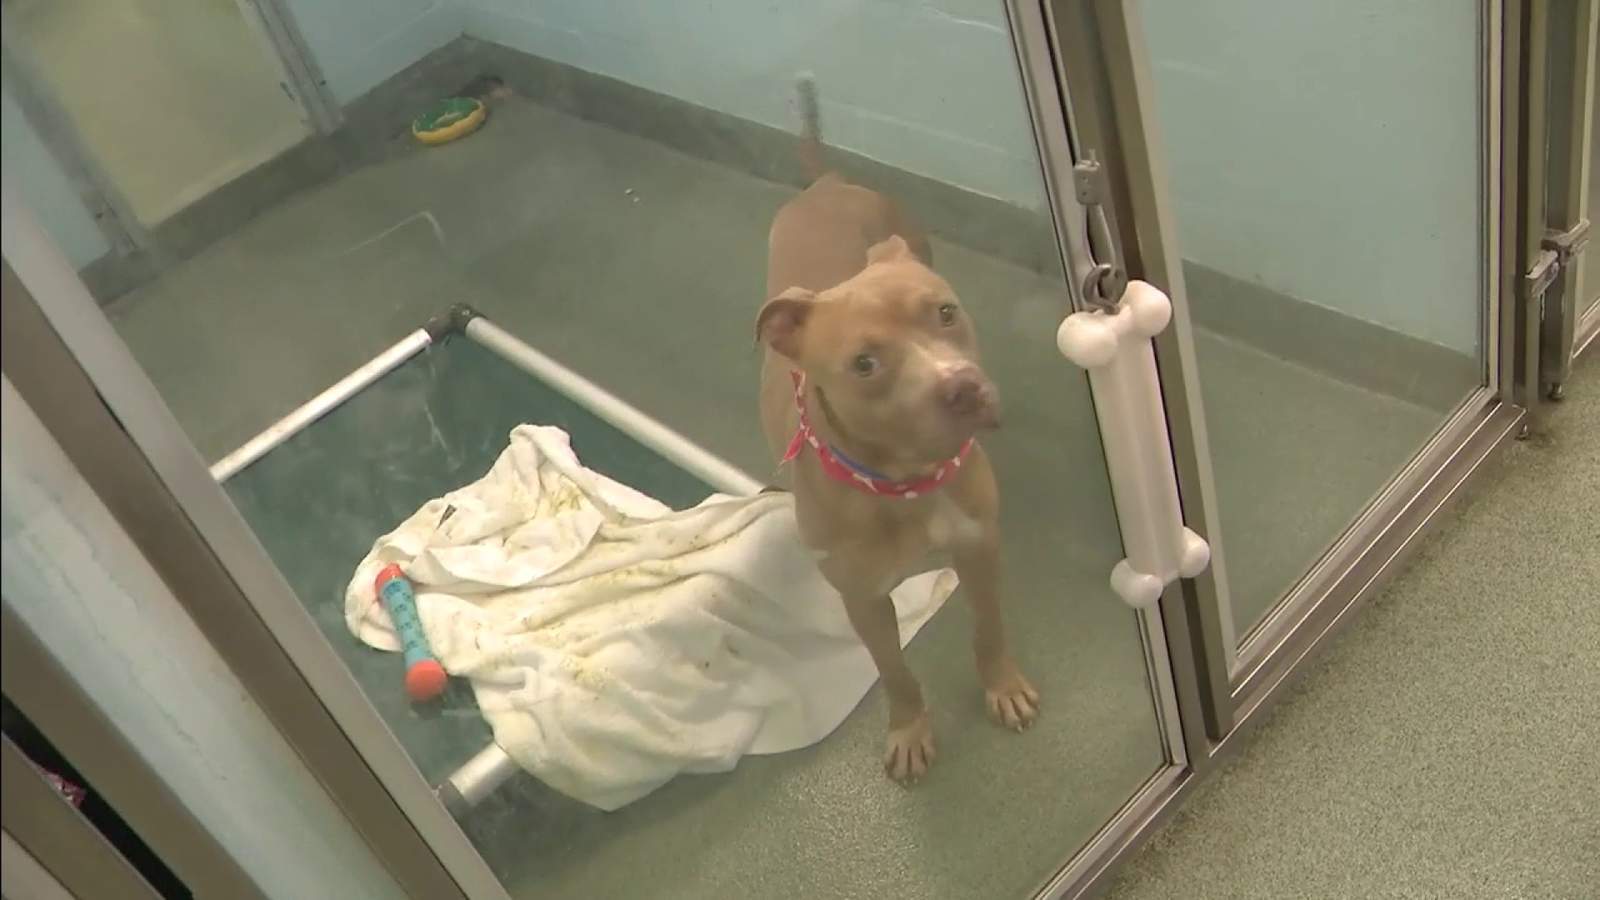 Humane Society of Broward County needs support amid increased demand for pets during pandemic